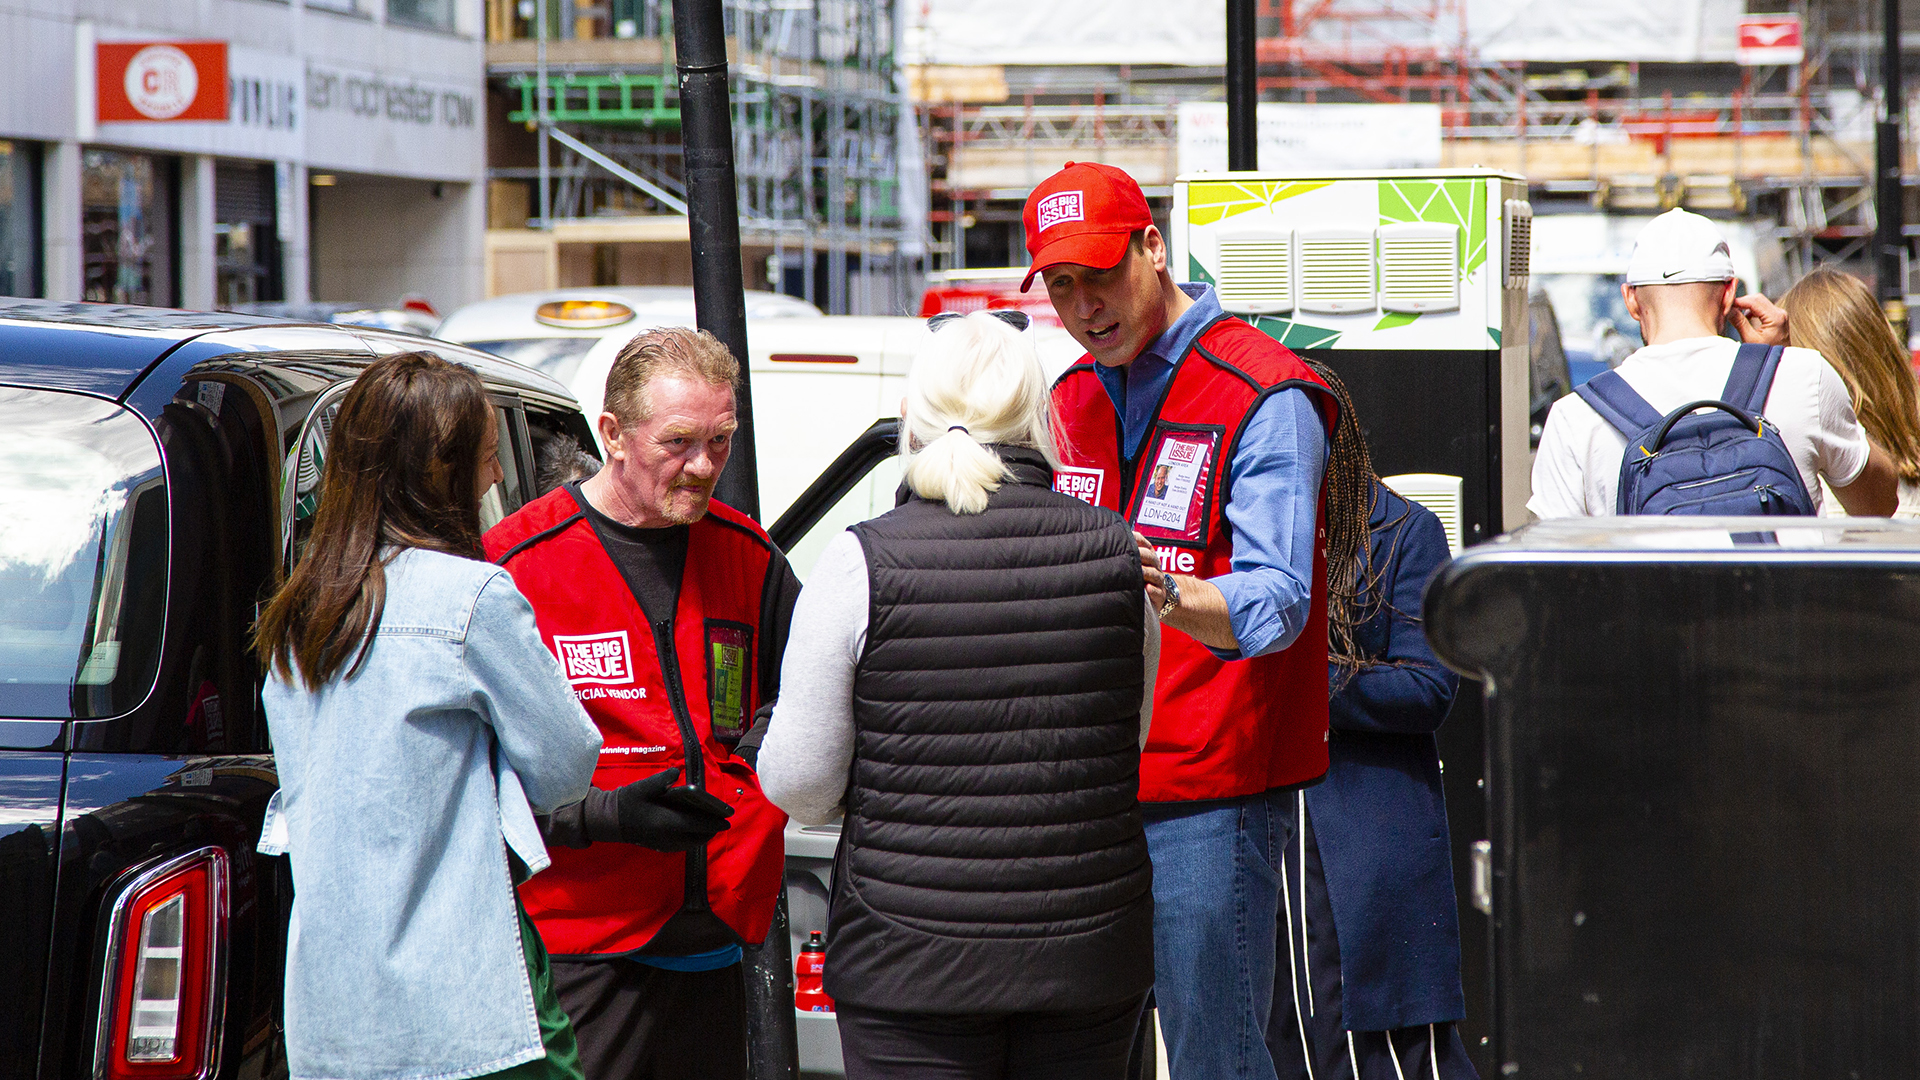 Prince WIlliam and Big Issue vendor Dave Martin chat to customers in central London